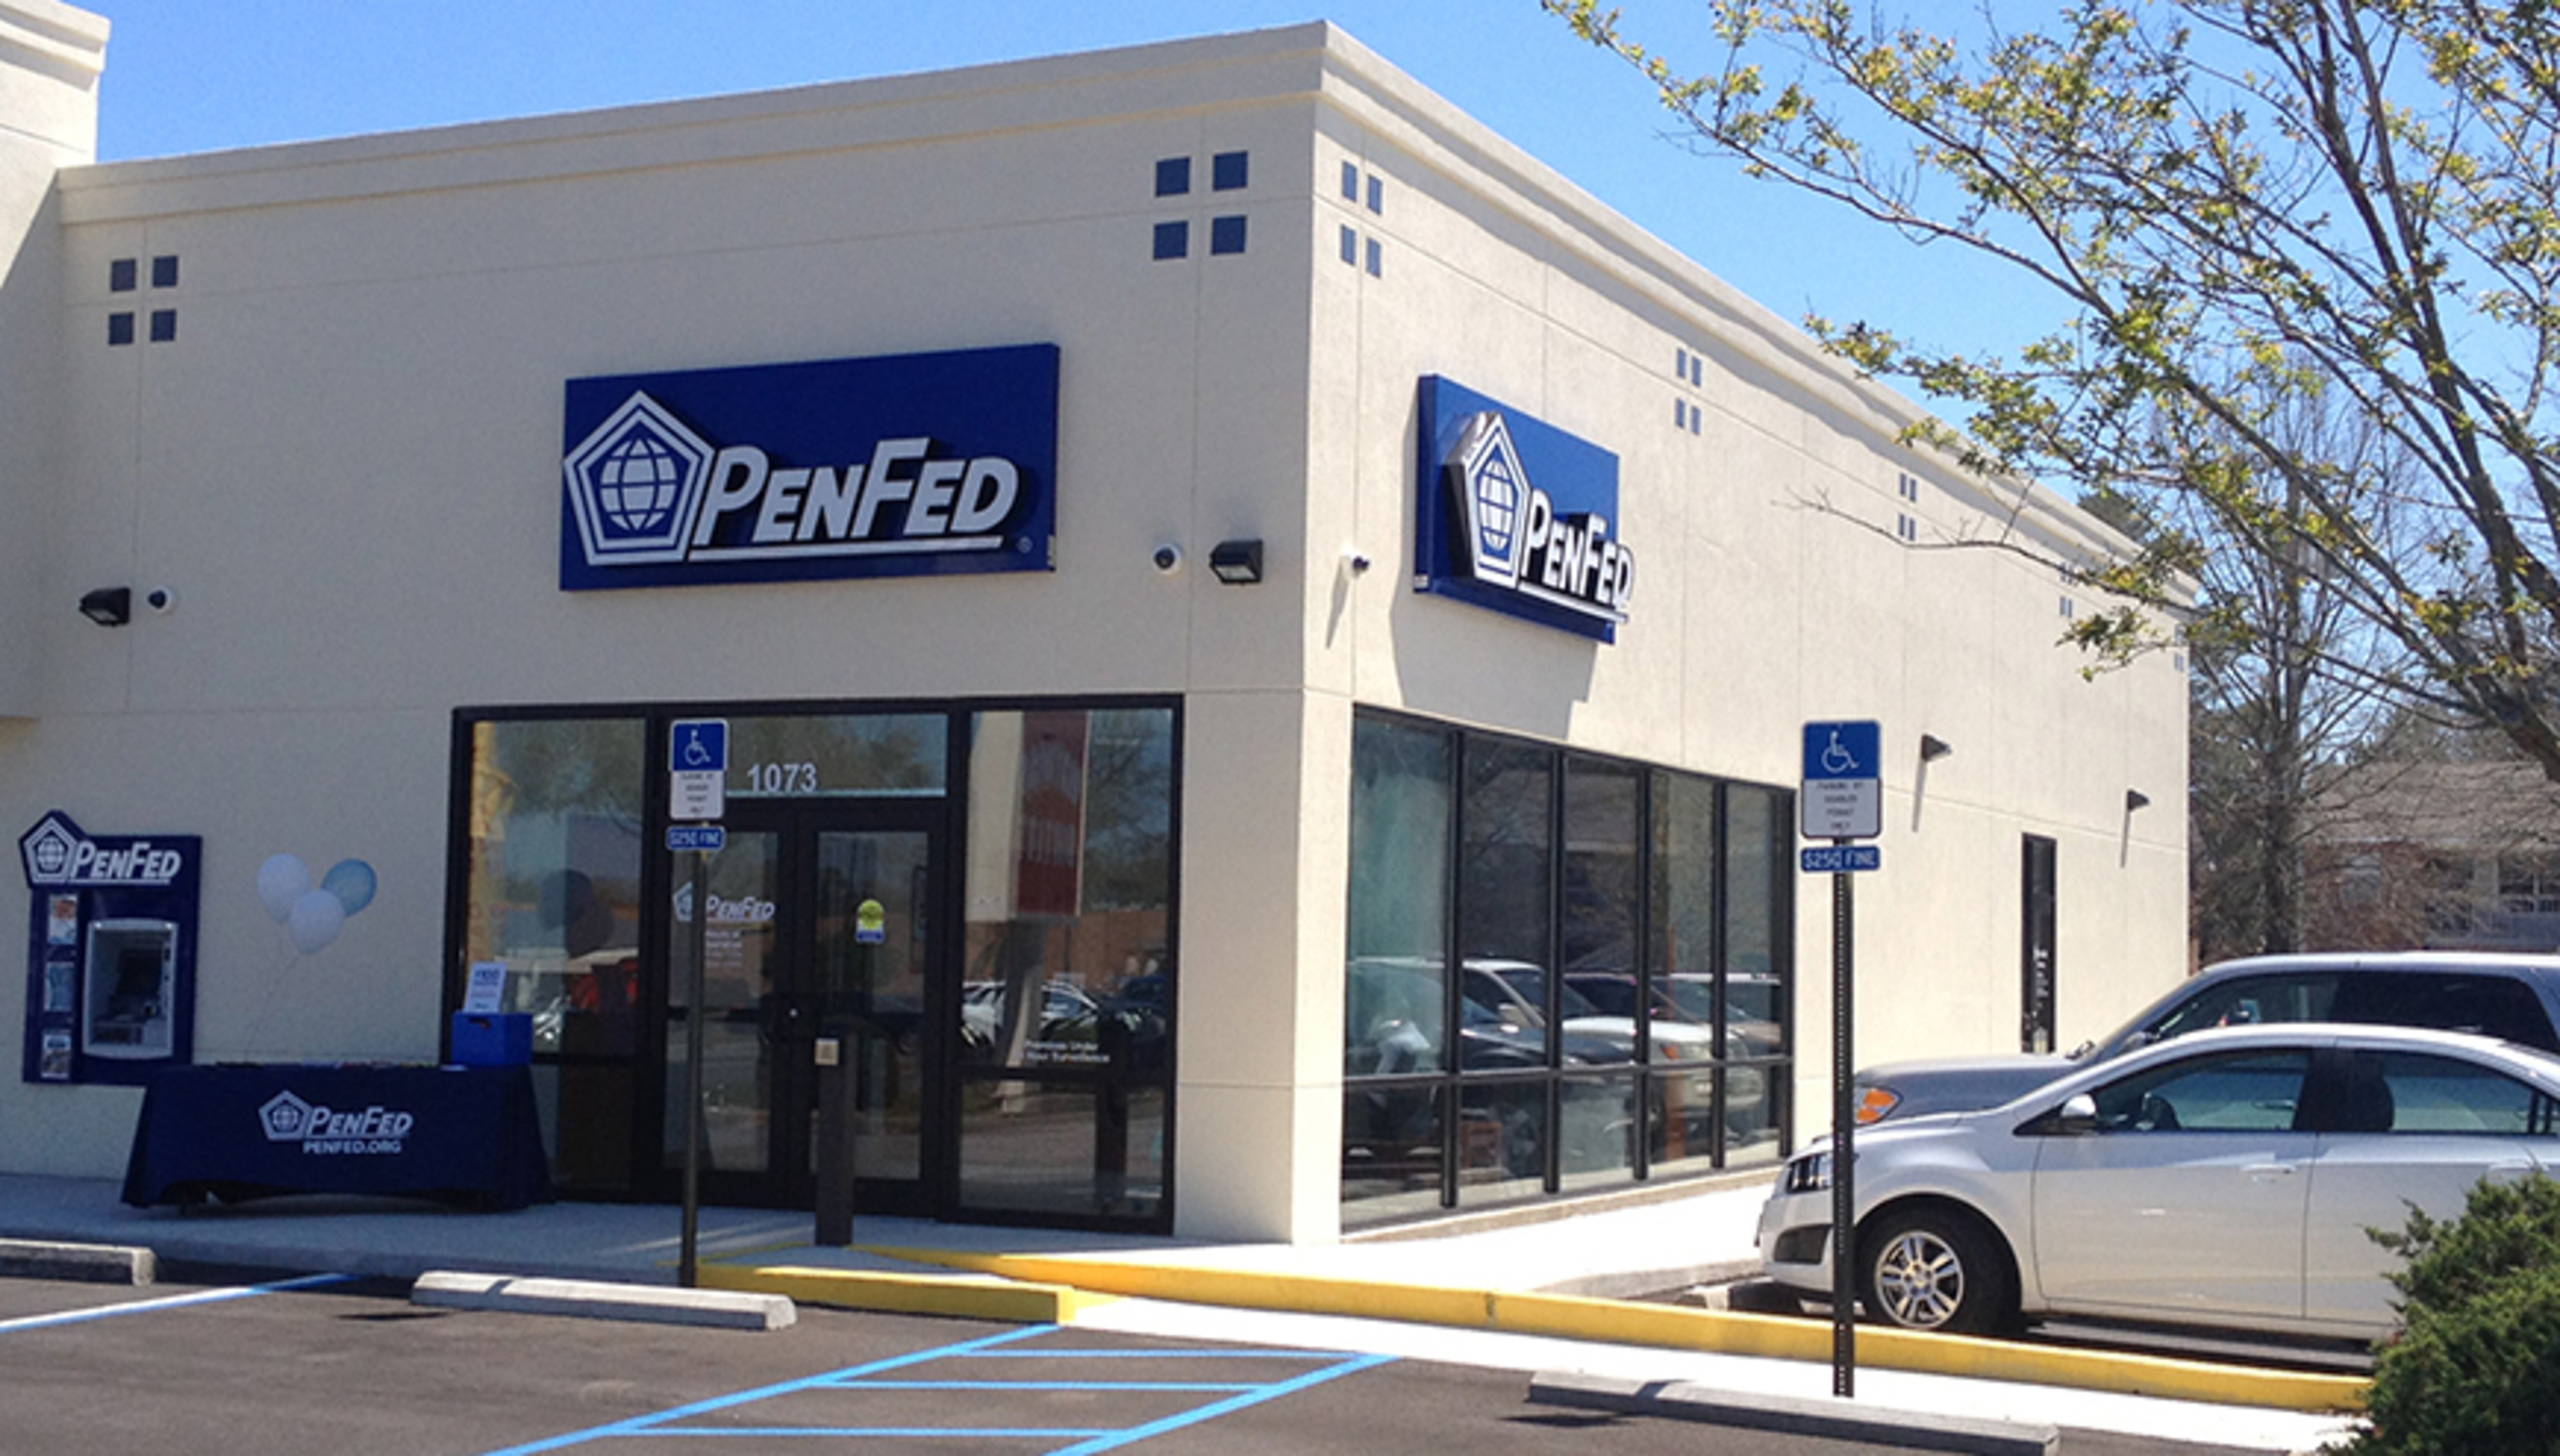 The PenFed branch is located at 1073 John Sims E. Parkway in Niceville, Fla.  (PRNewsFoto/PenFed)